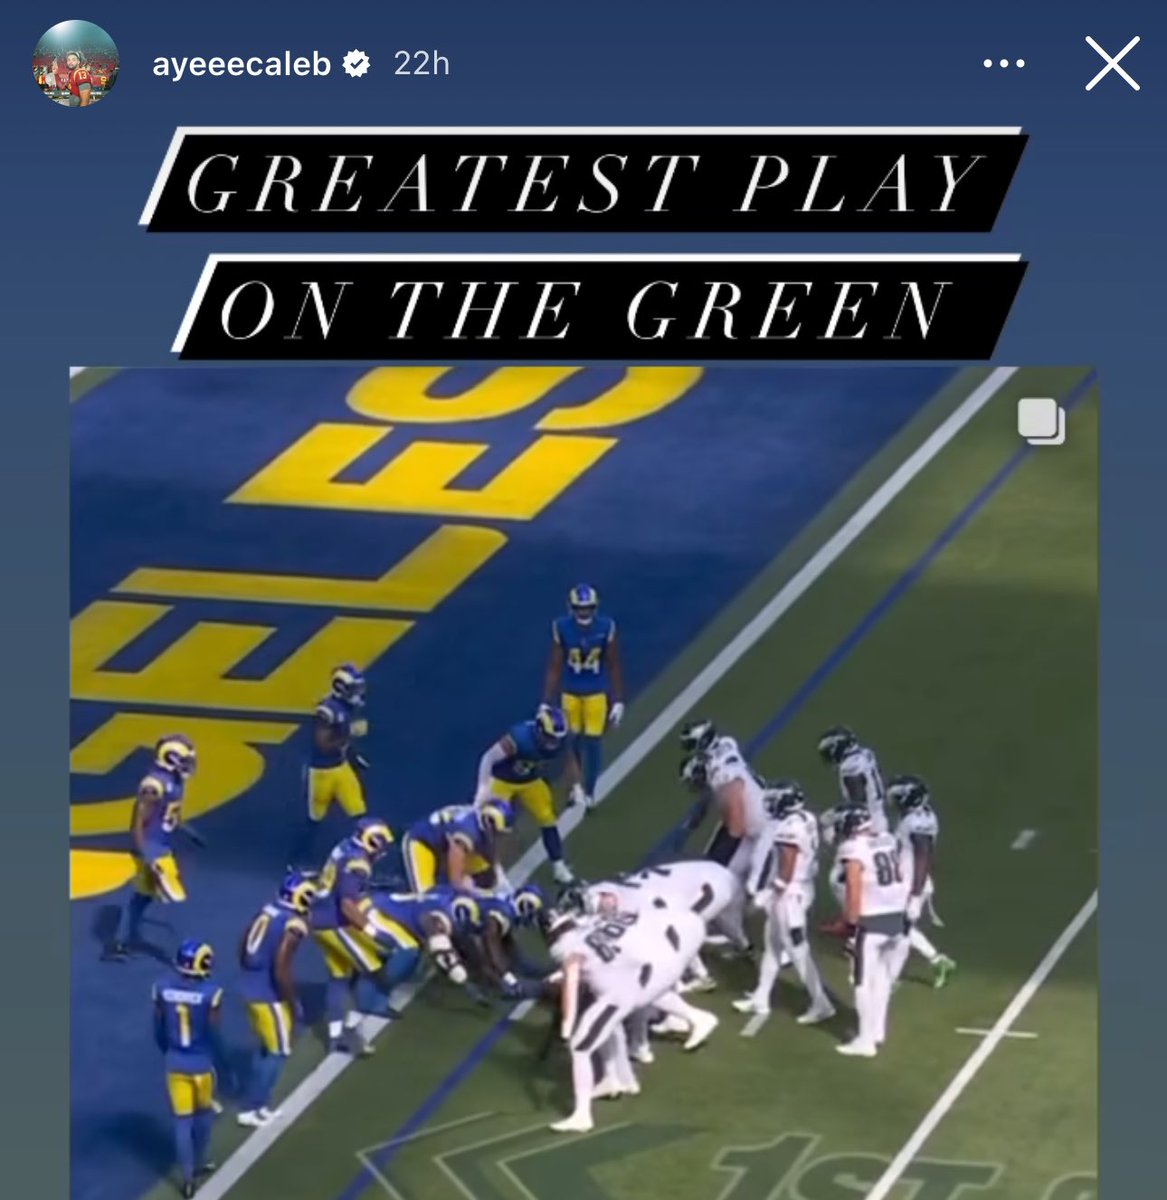 USC QB Caleb Williams is a fan of the #Eagles Brotherly Shove: “Greatest play on the Green.” 🦅